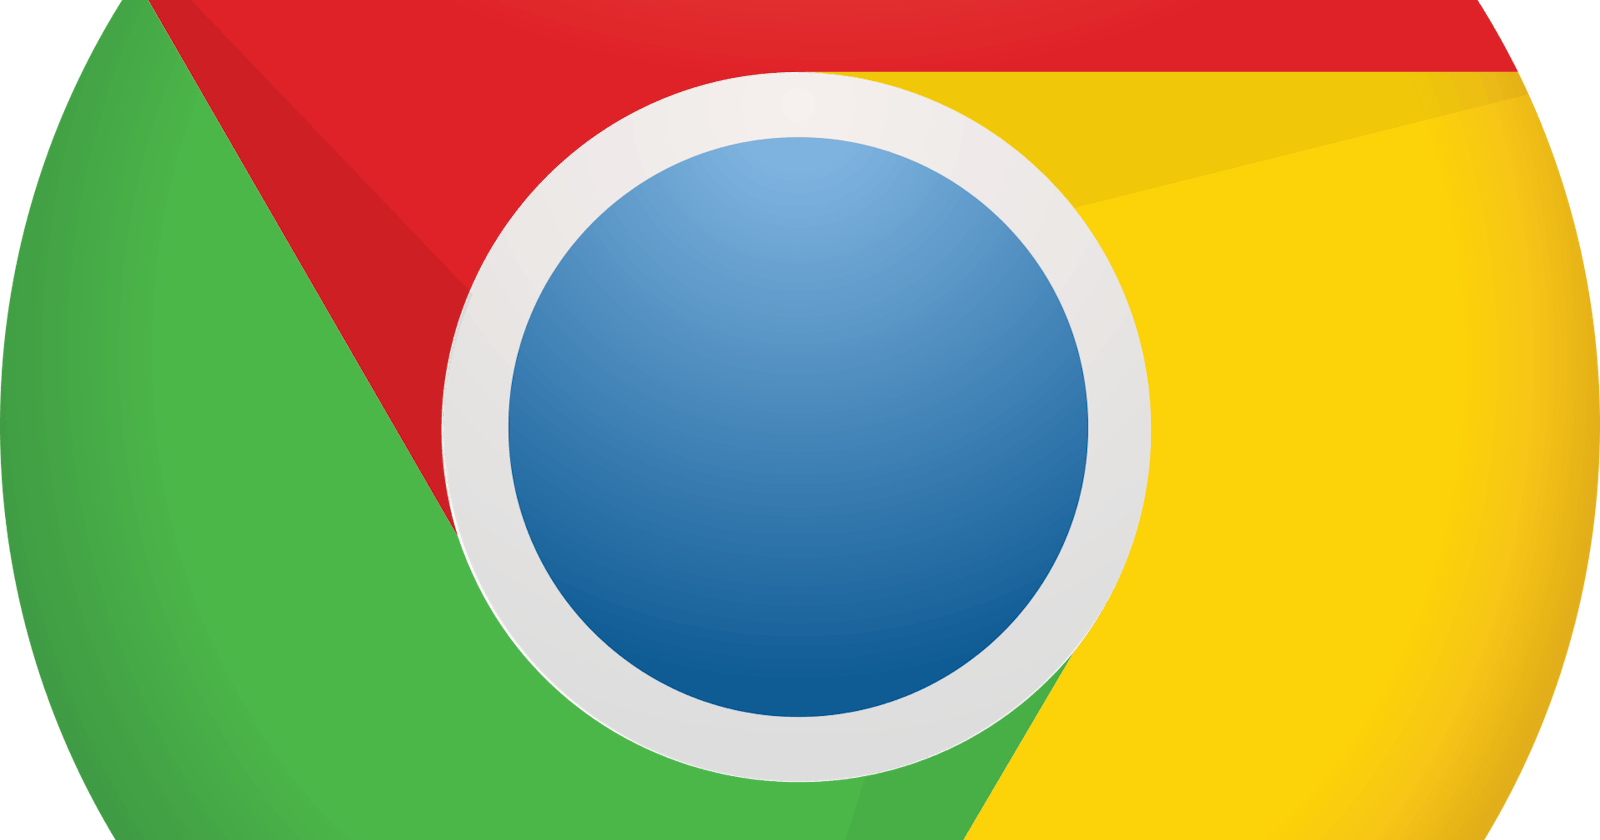 Free Internet for Iran with Google Chrome